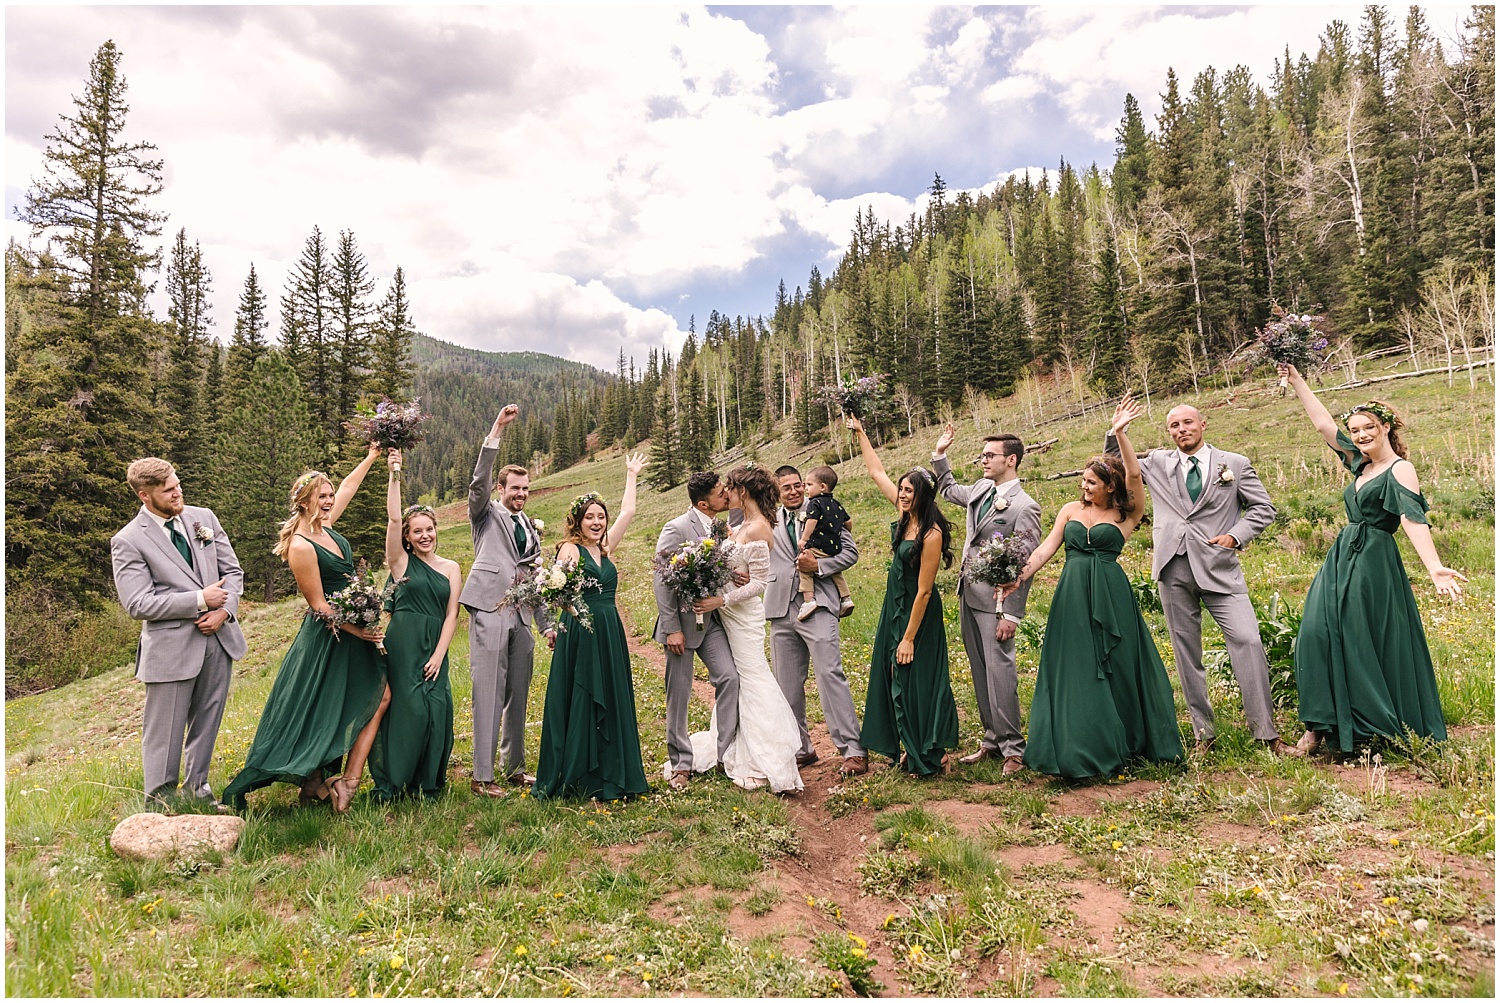 Bridesmaids in forest green dresses and groomsmen in light gray suits for mountain wedding near Telluride